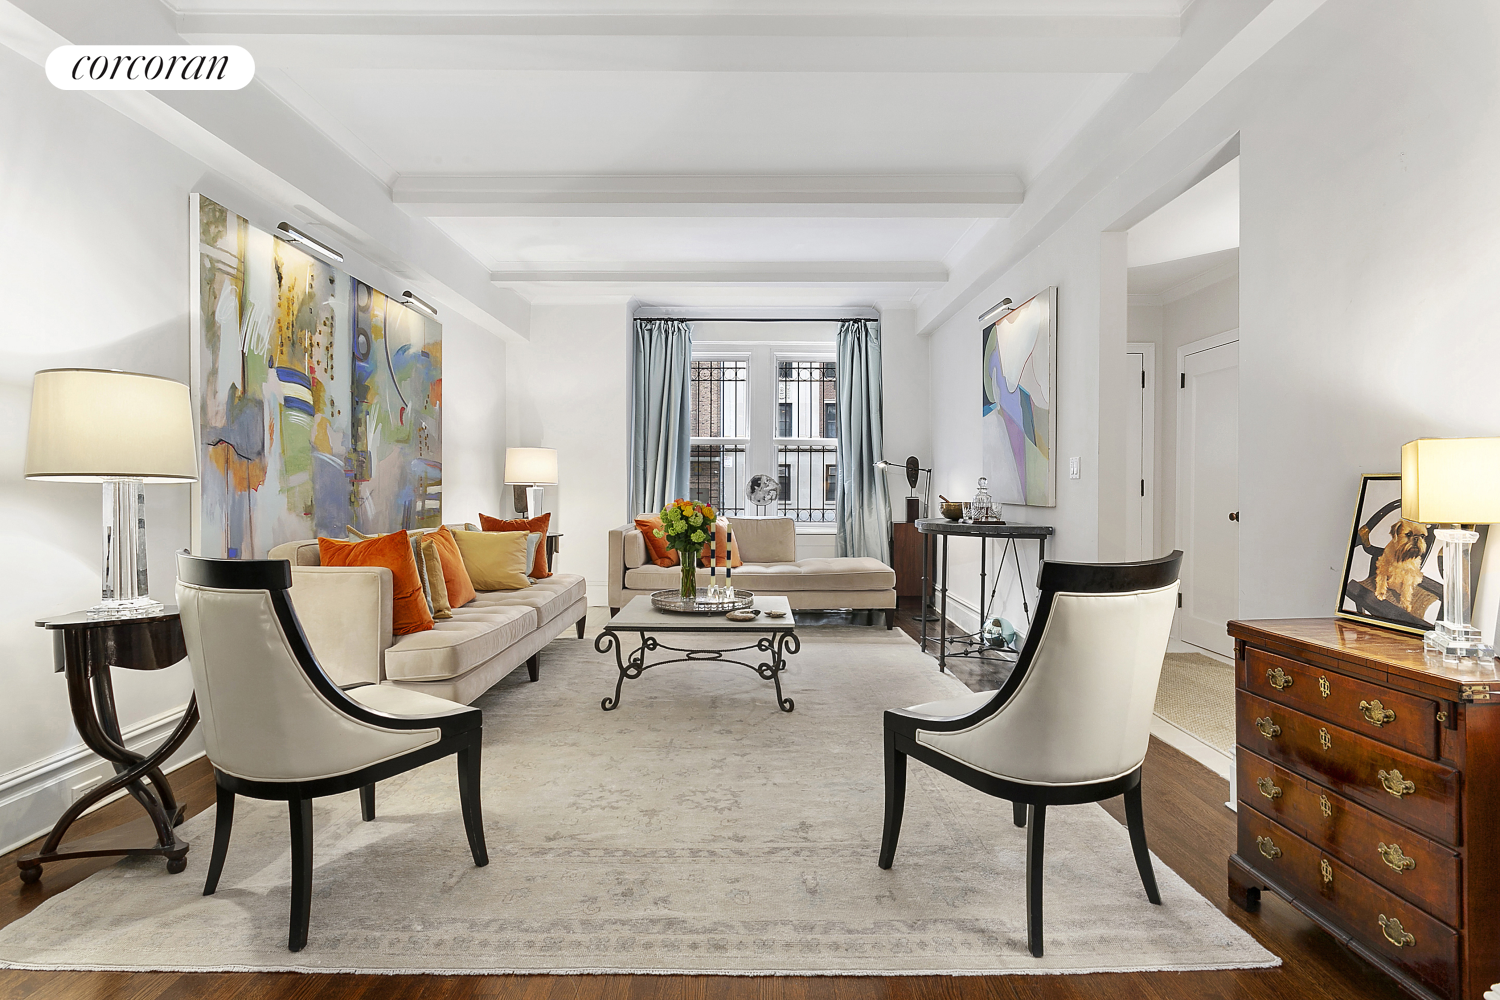 419 East 57th Street Mw, Sutton, Midtown East, NYC - 4 Bedrooms  
3.5 Bathrooms  
7 Rooms - 